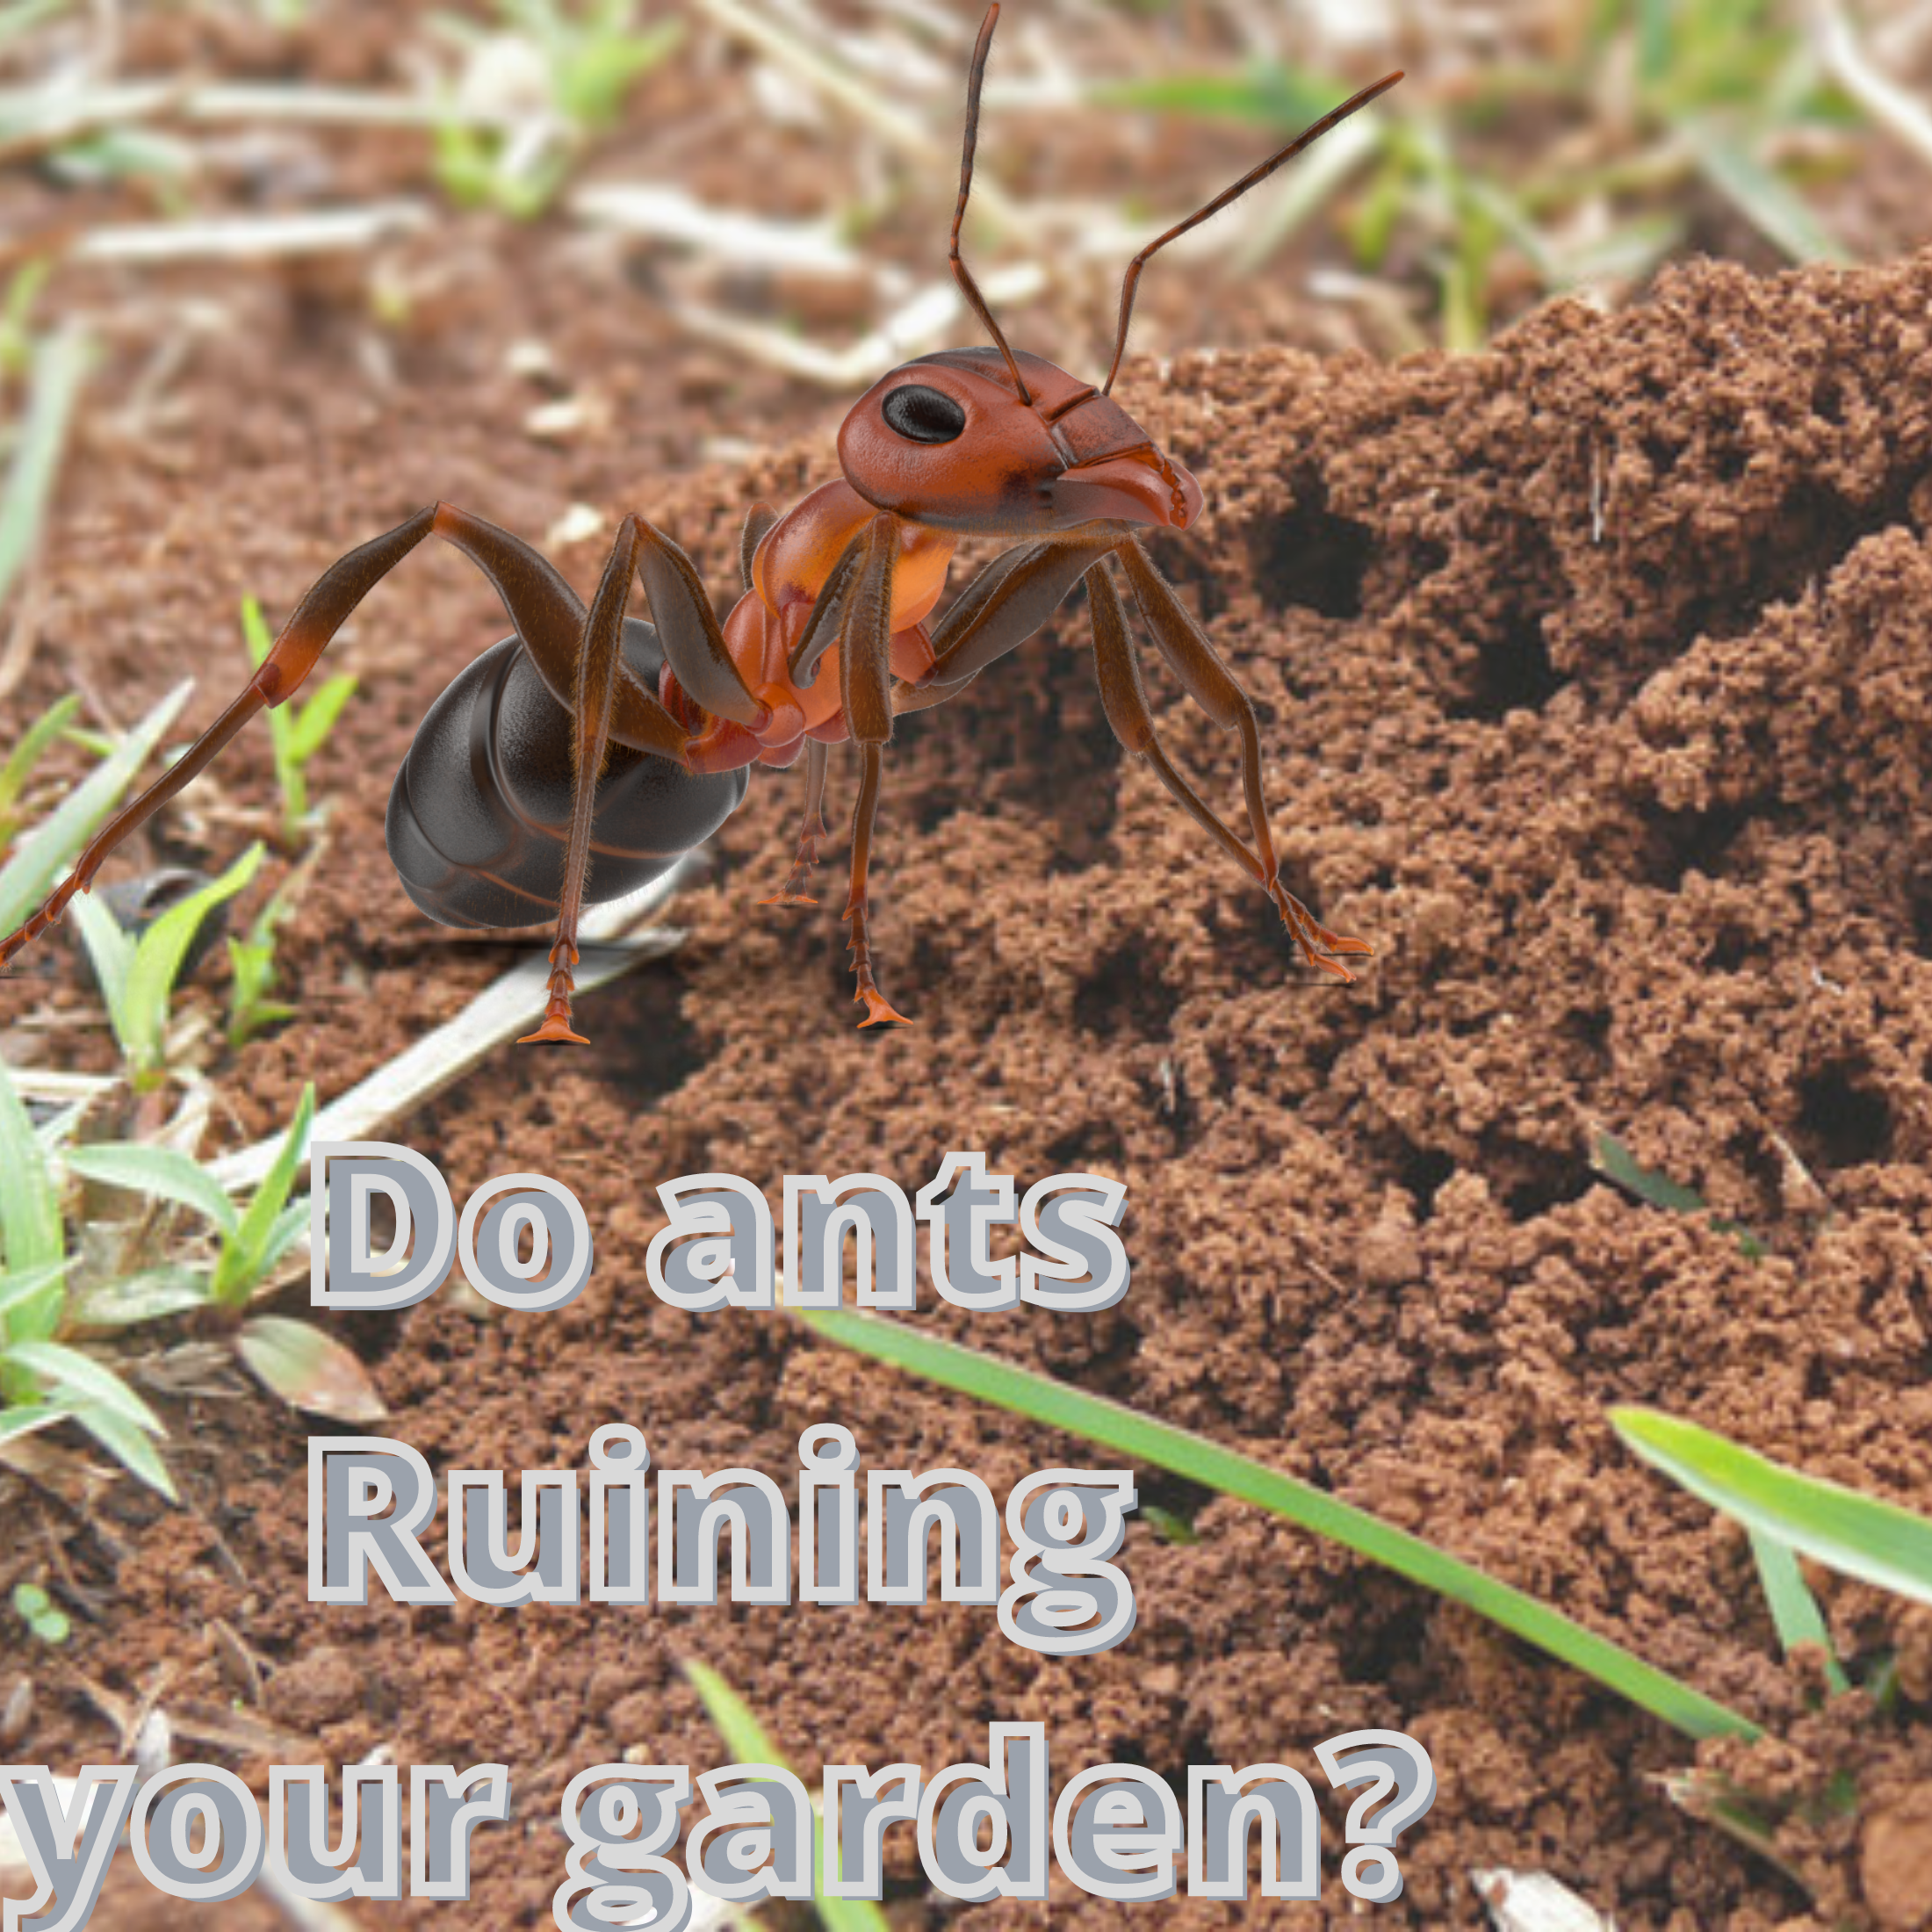 How to get rid of ants in the garden without killing plants?